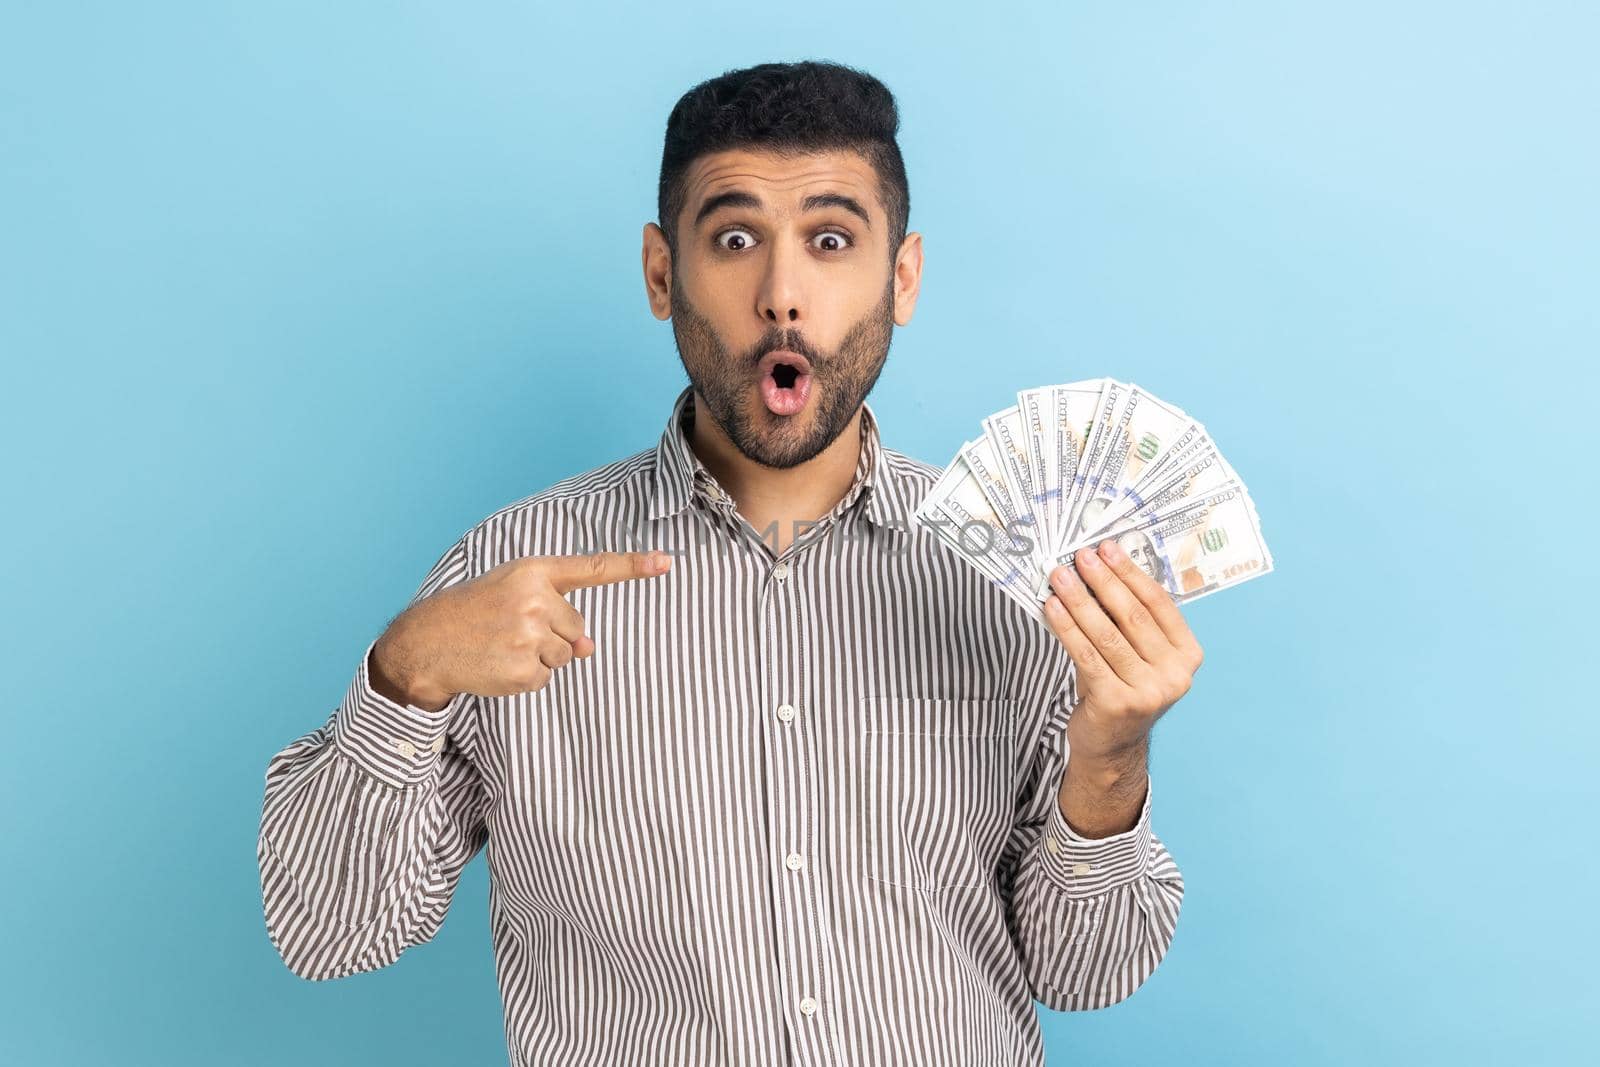 Shocked businessman holding lot of money, pointing at dollar bills in hand and keeps mouth open, excited of lottery win, wearing striped shirt. Indoor studio shot isolated on blue background.